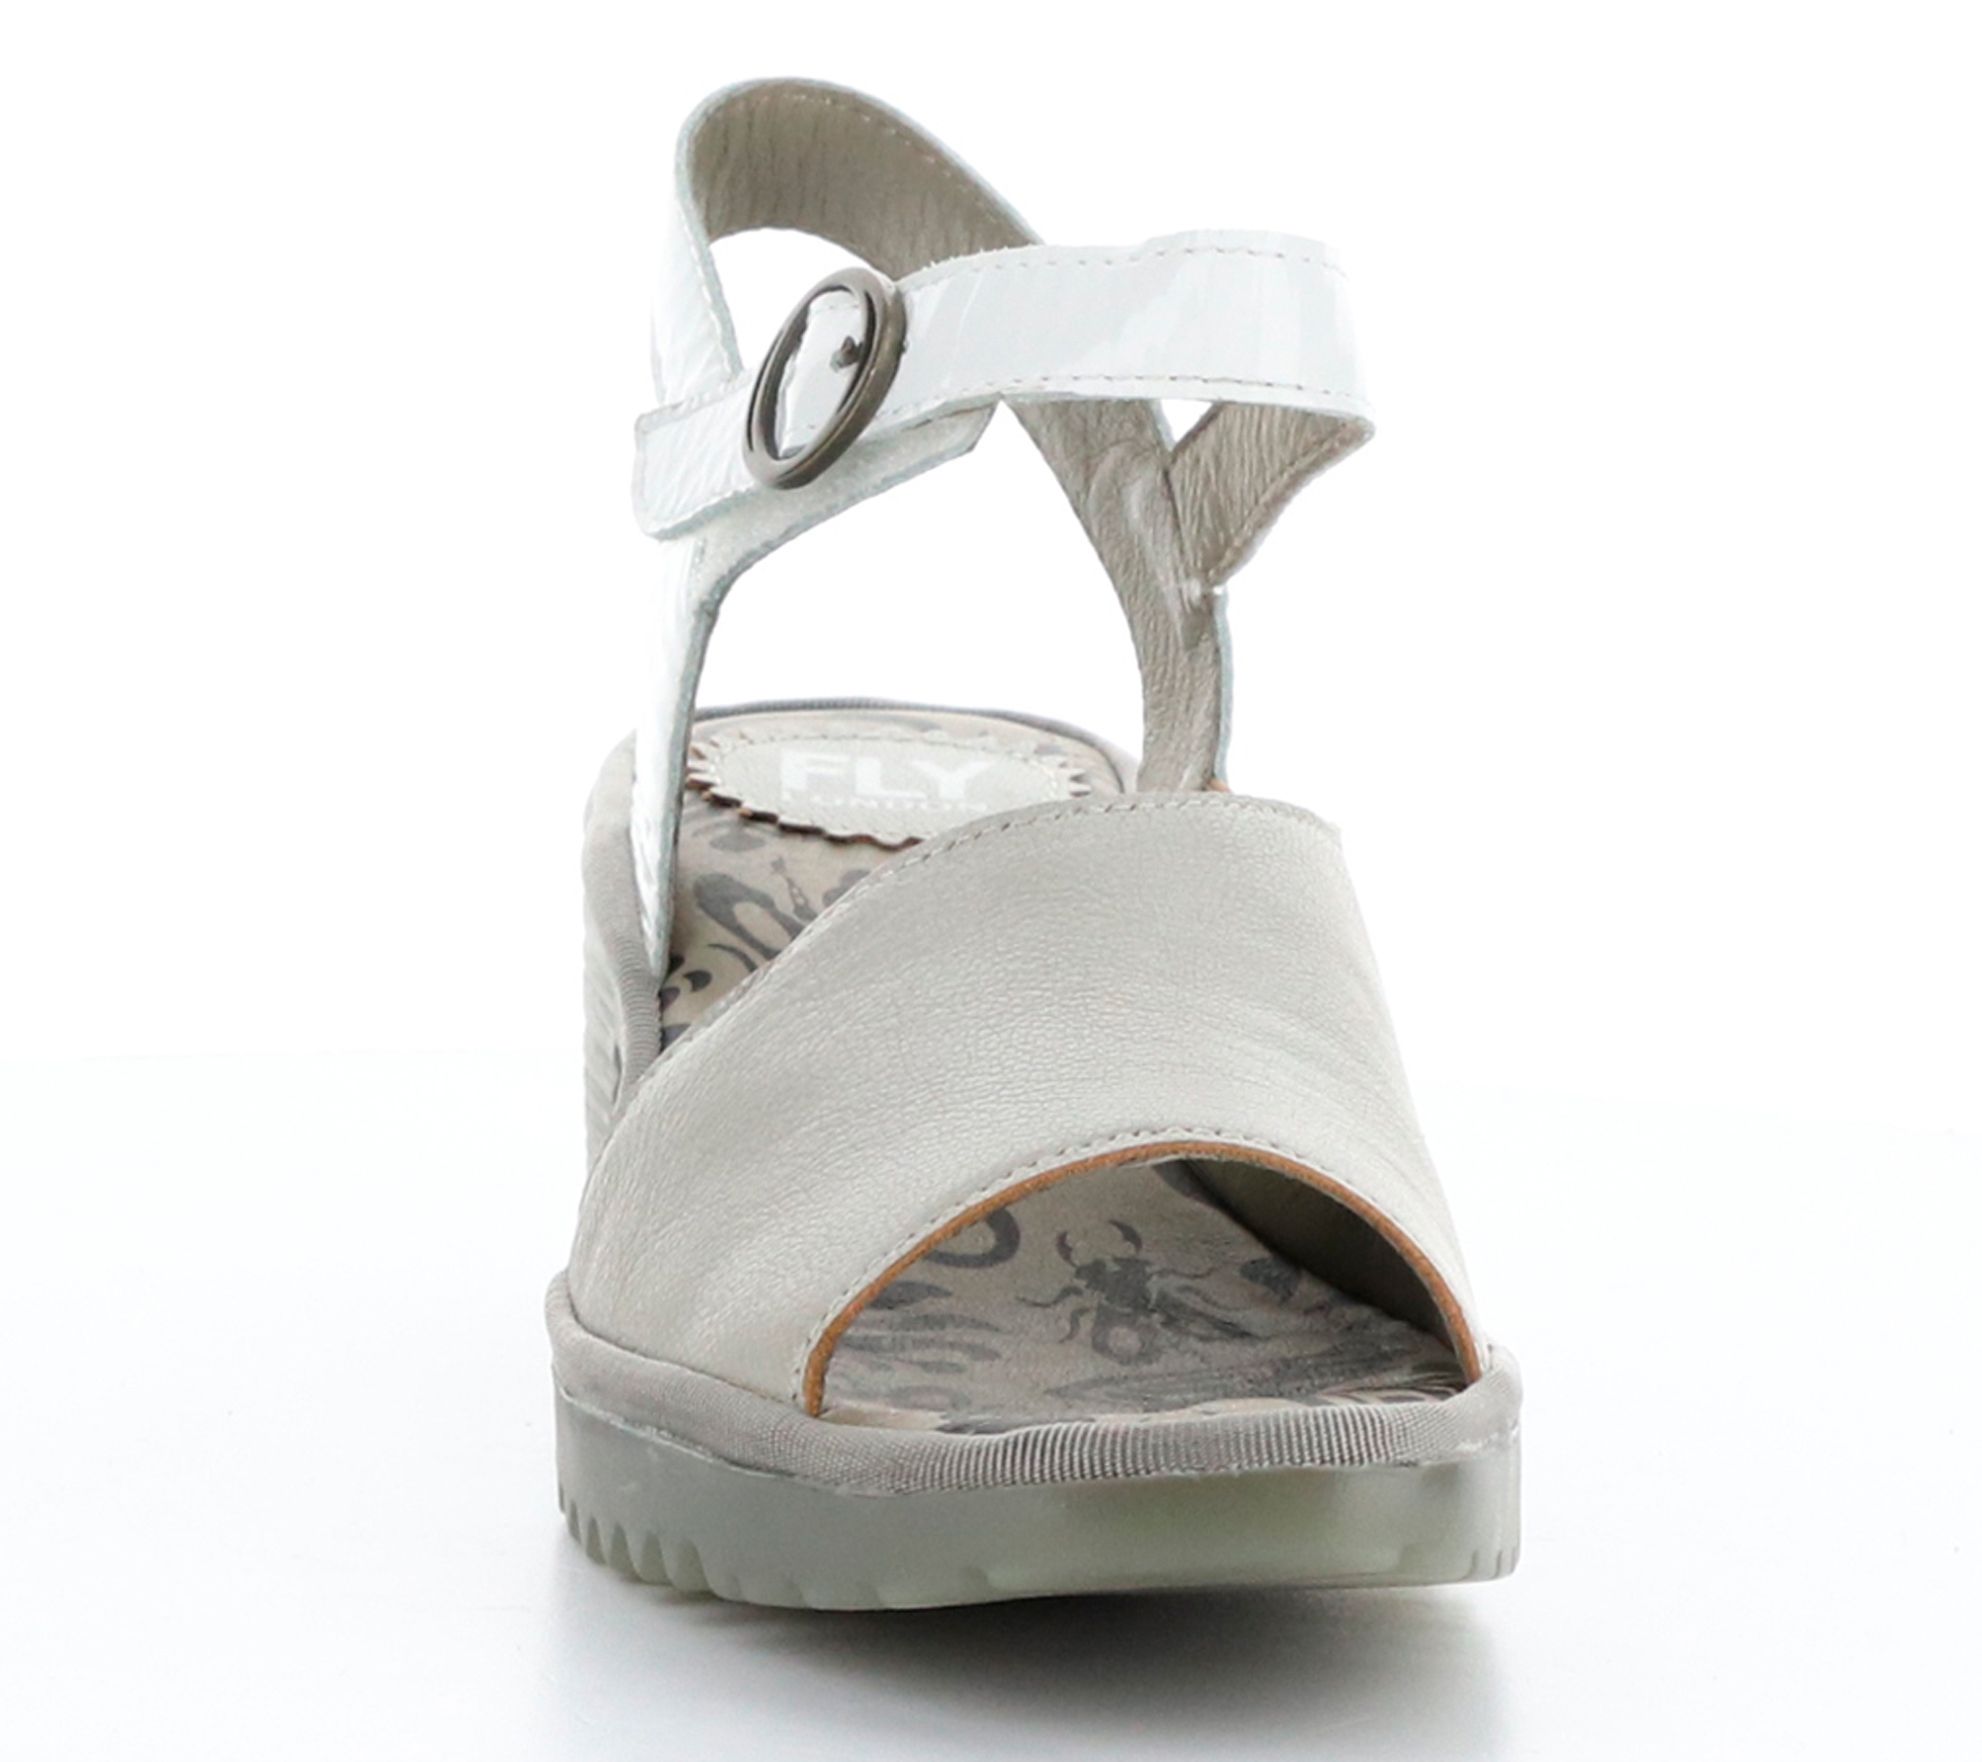 Fly London Leather Sandal - Wely Silver - QVC.com